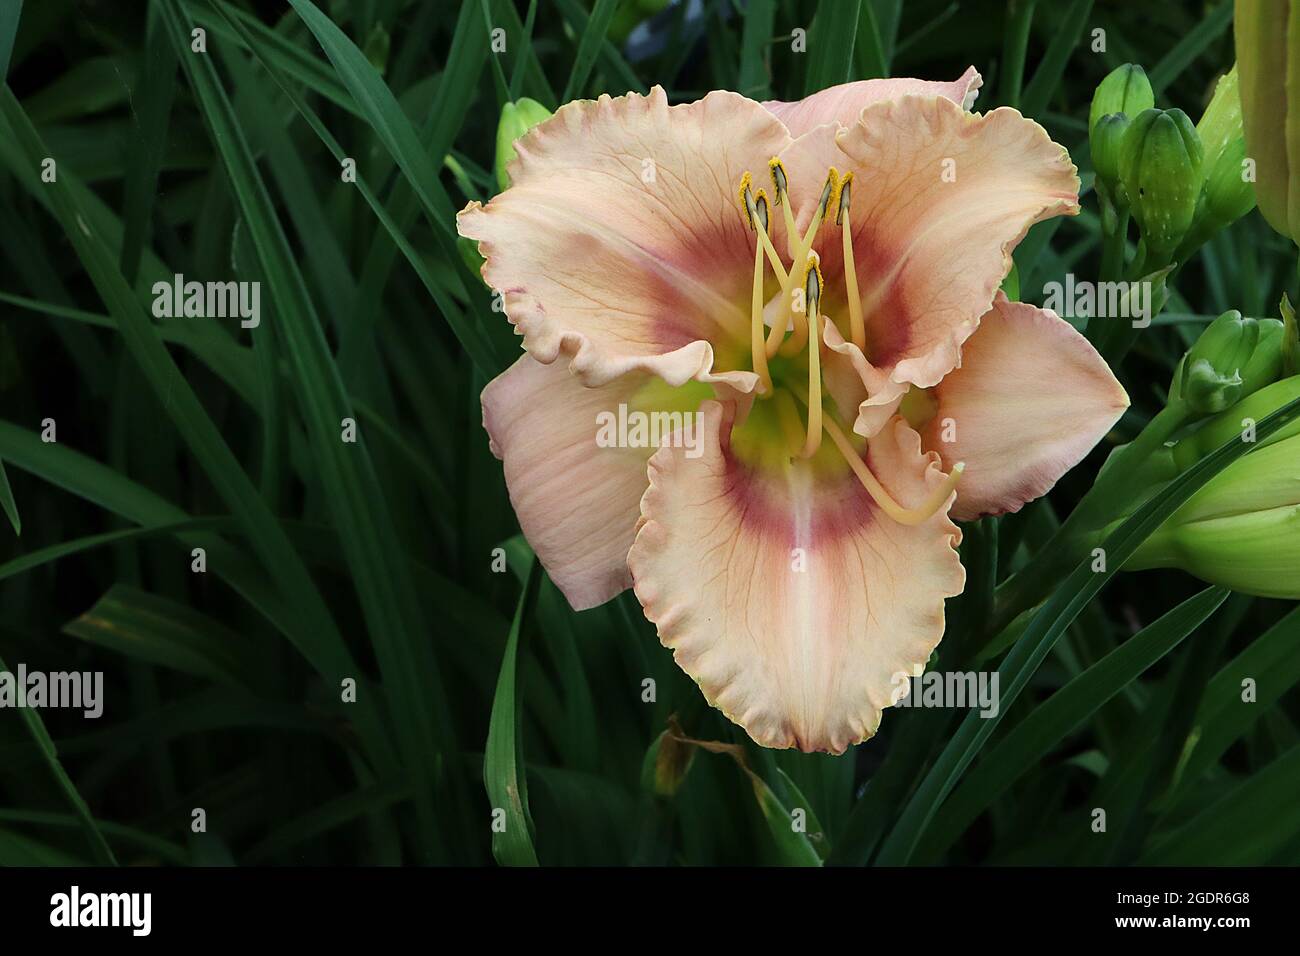 Hemerocallis ‘Roseanne’ daylily Roseanne – funnel-shaped apricot flowers with dusky pink halo, frilly margins, light green throat,  July, England, UK Stock Photo